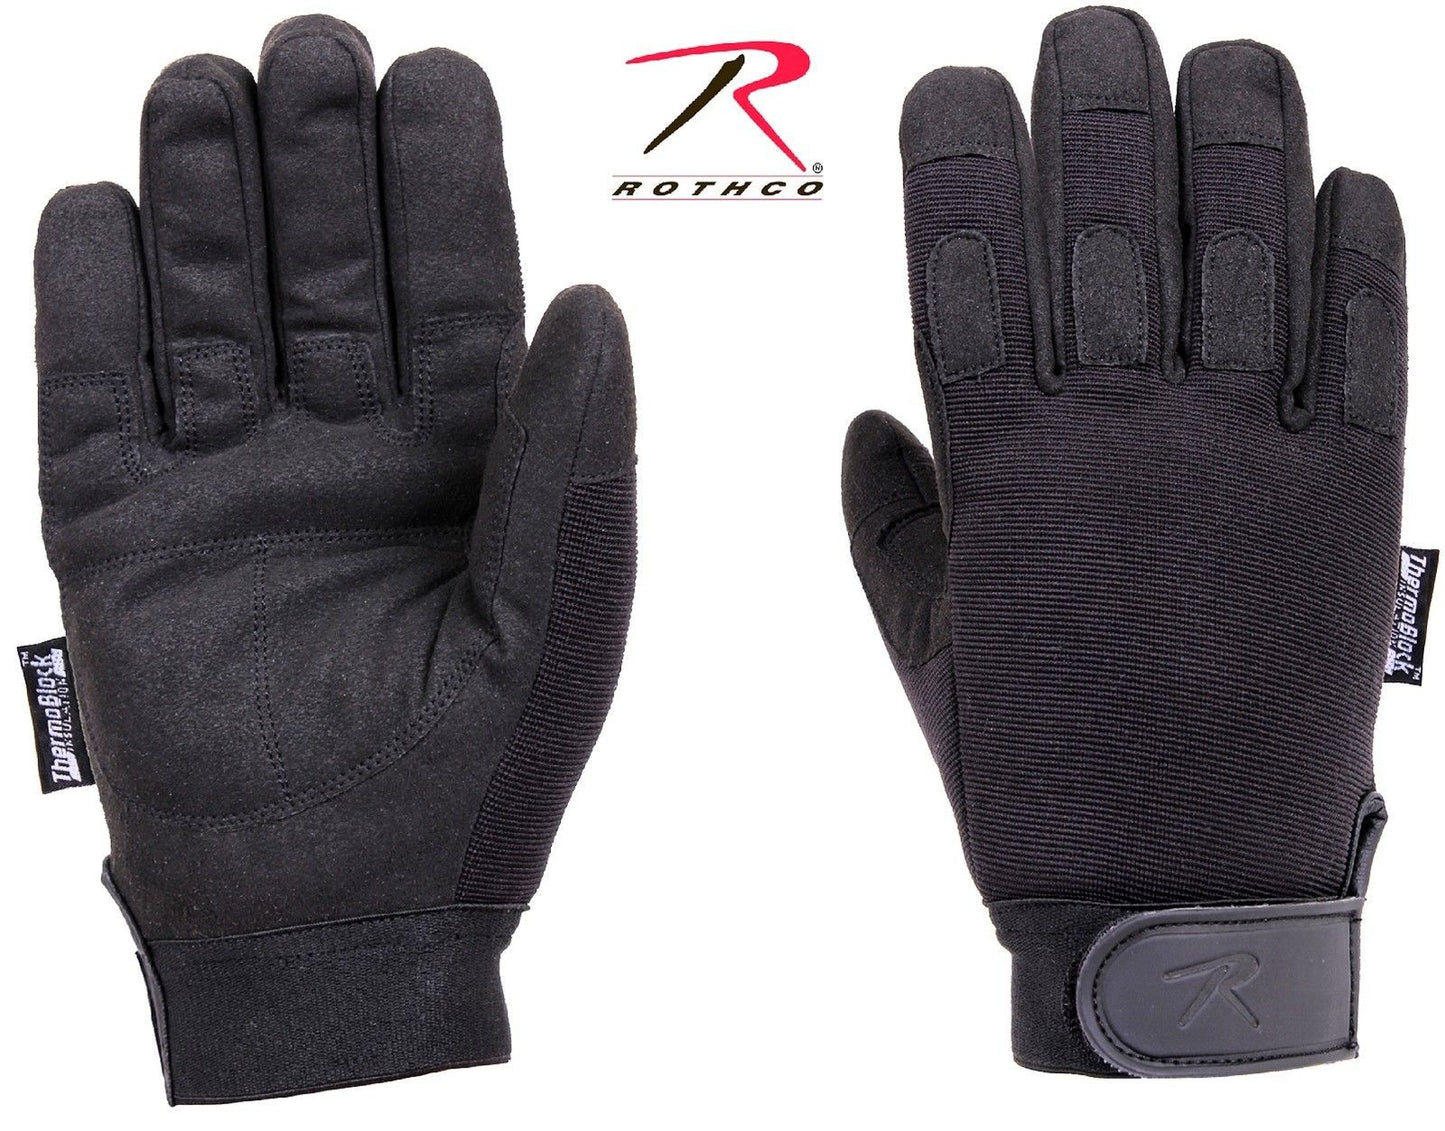 Rothco Black Cold Weather All-Purpose Duty Gloves - Poly Spandex Winter Gloves